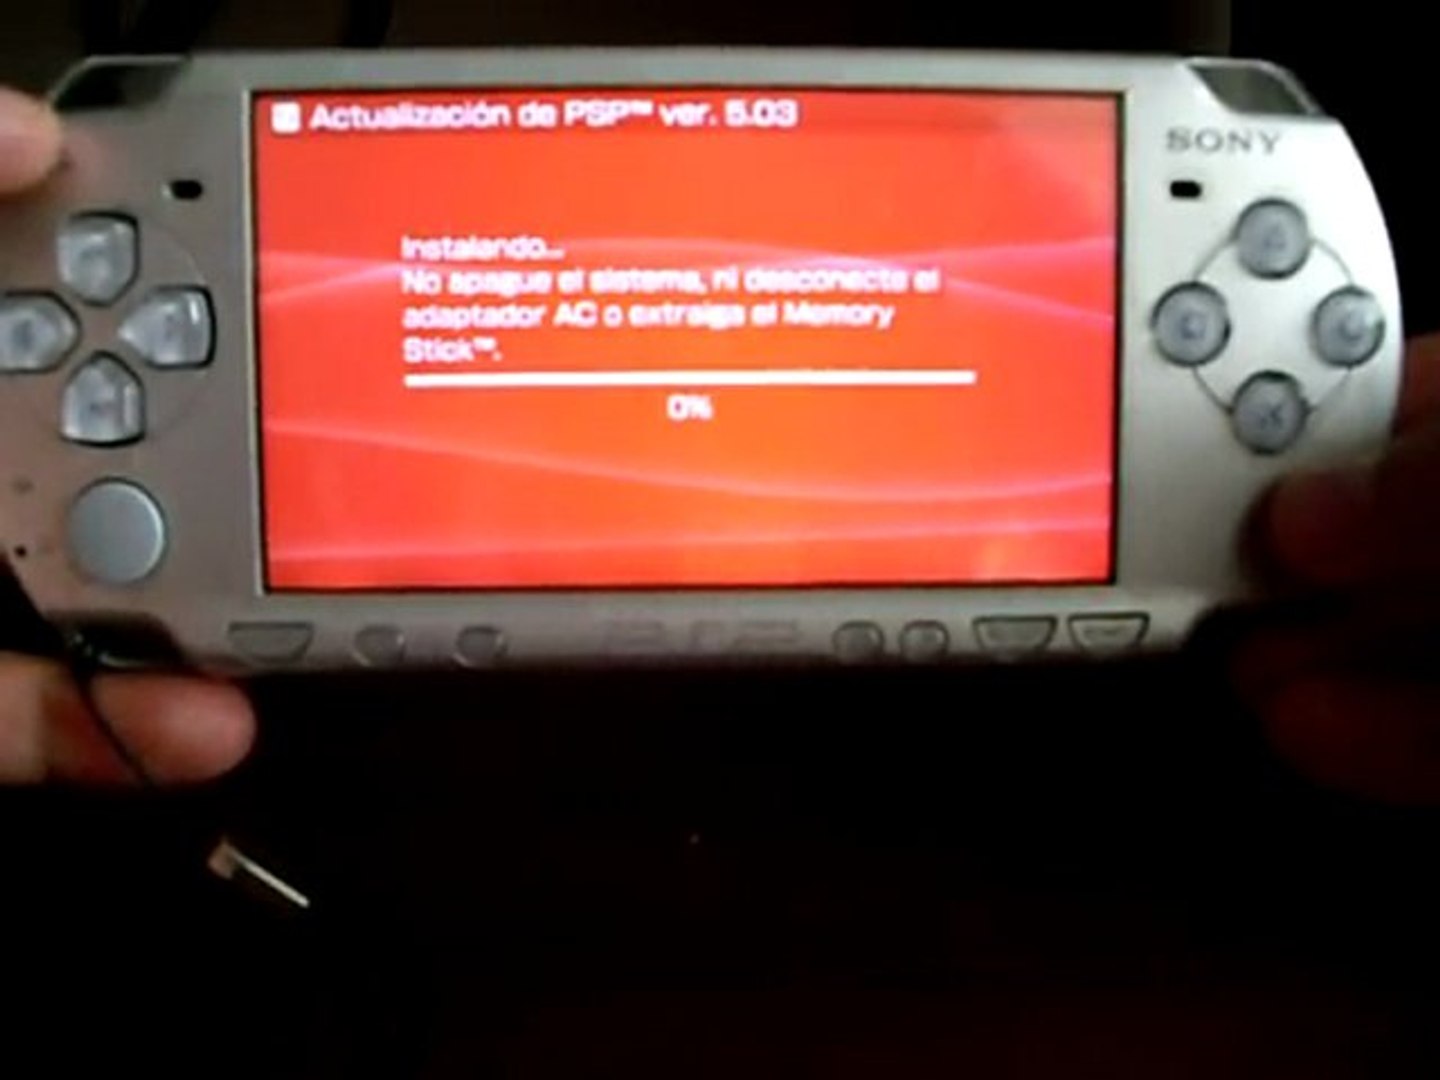 PSP update official firmware 5.03 - Vídeo Dailymotion